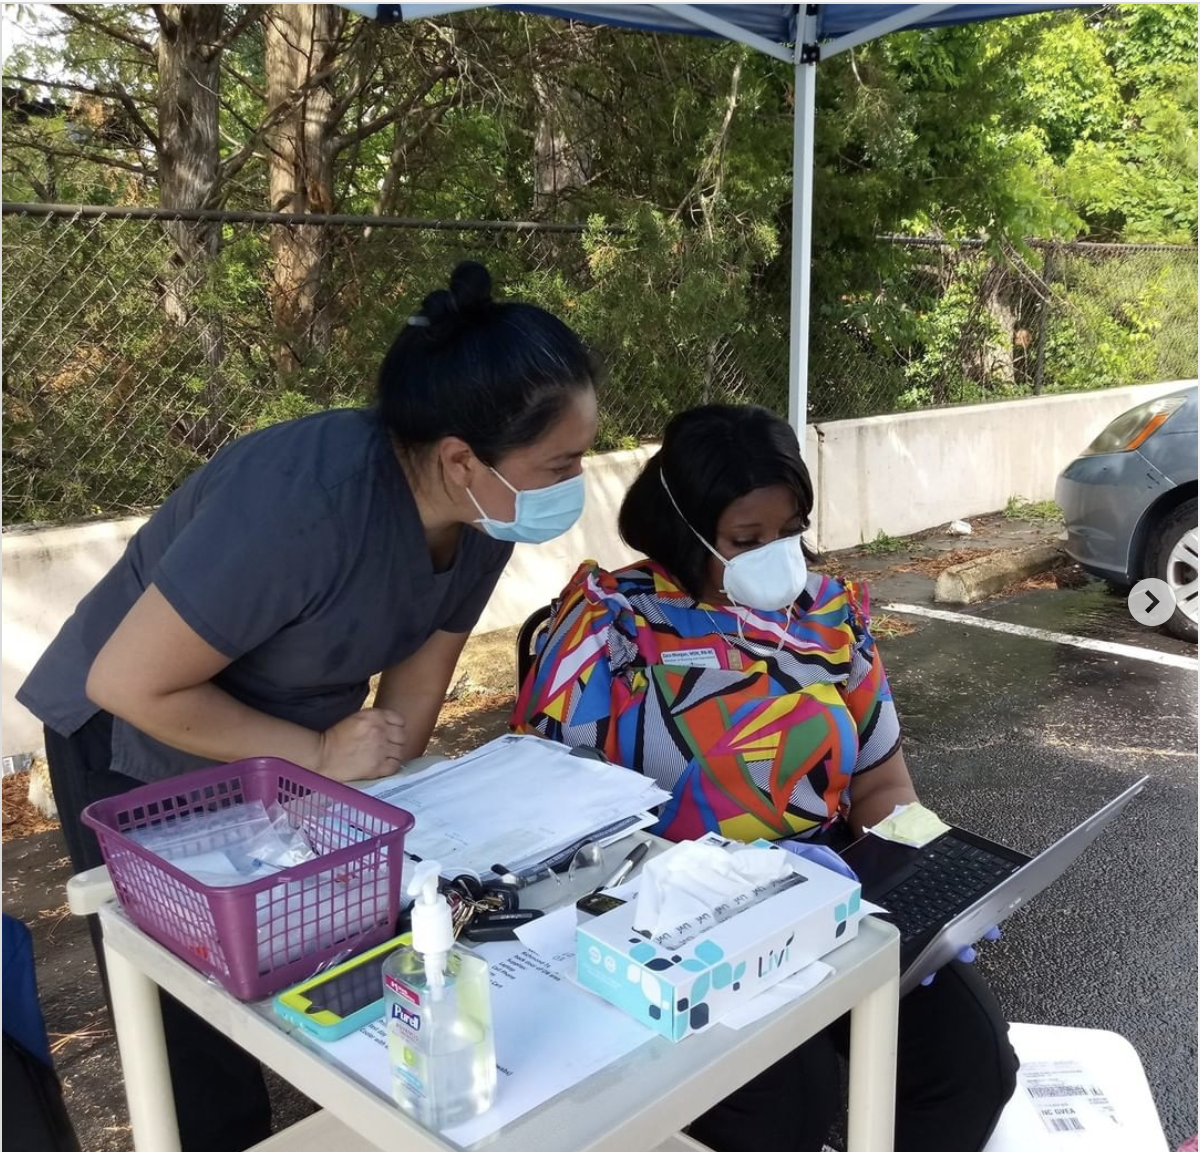 Two health care workers from CrossOver Healthcare Ministry under a tent in a parking lot, running a COVID-19 testing clinic